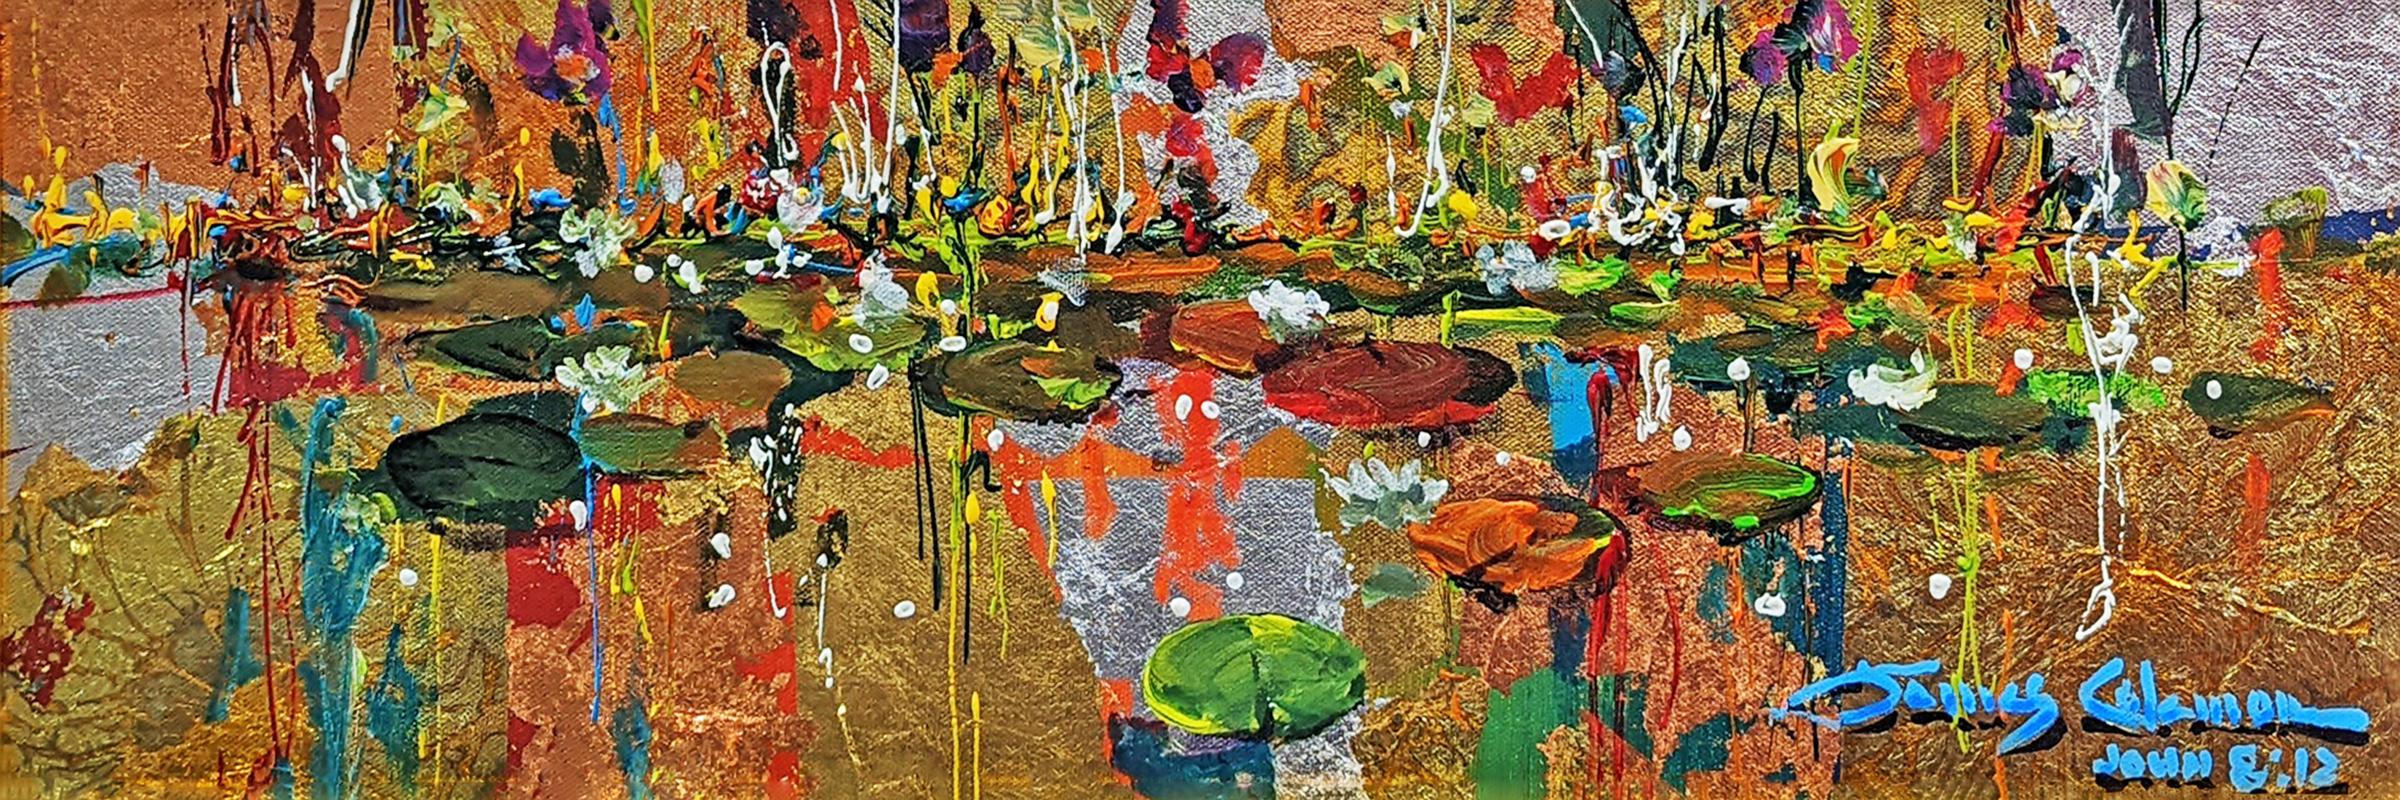 GOLD AND LILIES - Mixed Media Art by James Coleman